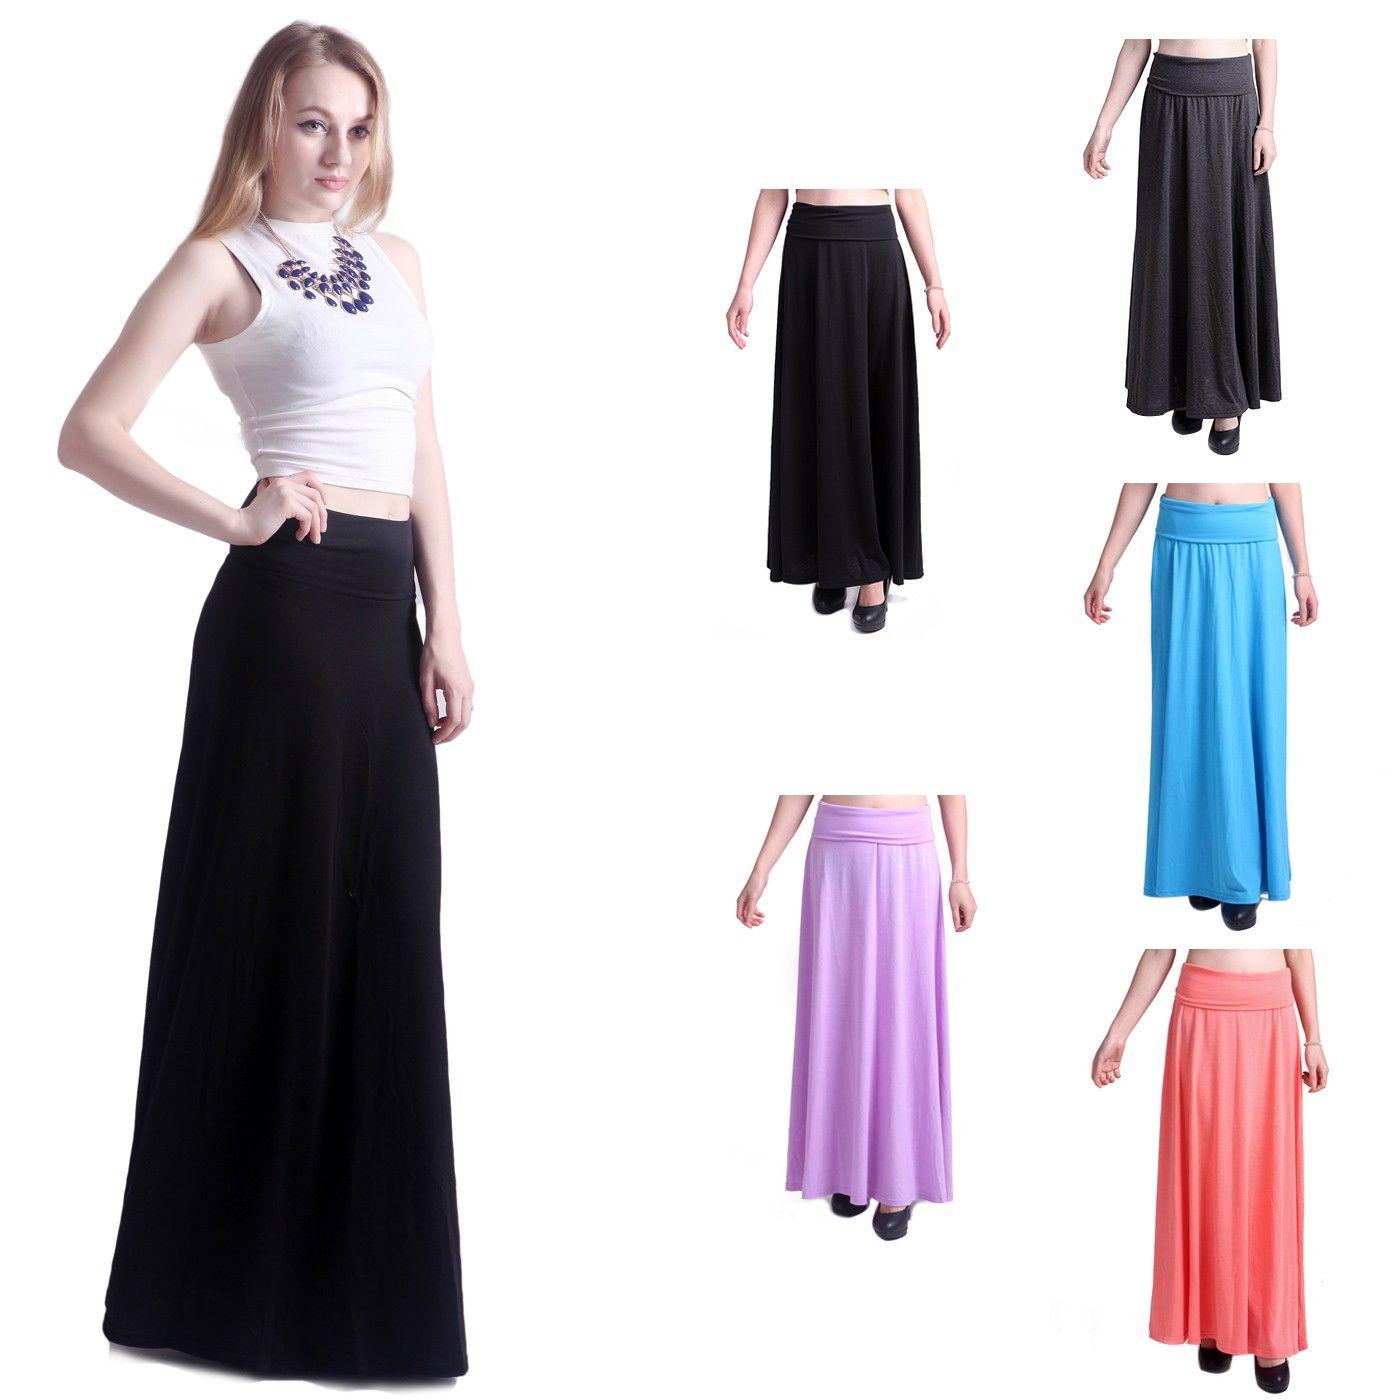 Women's Fashion Solid Jersey Full Length Long Fold Over Spandex Maxi Skirt Dress: 